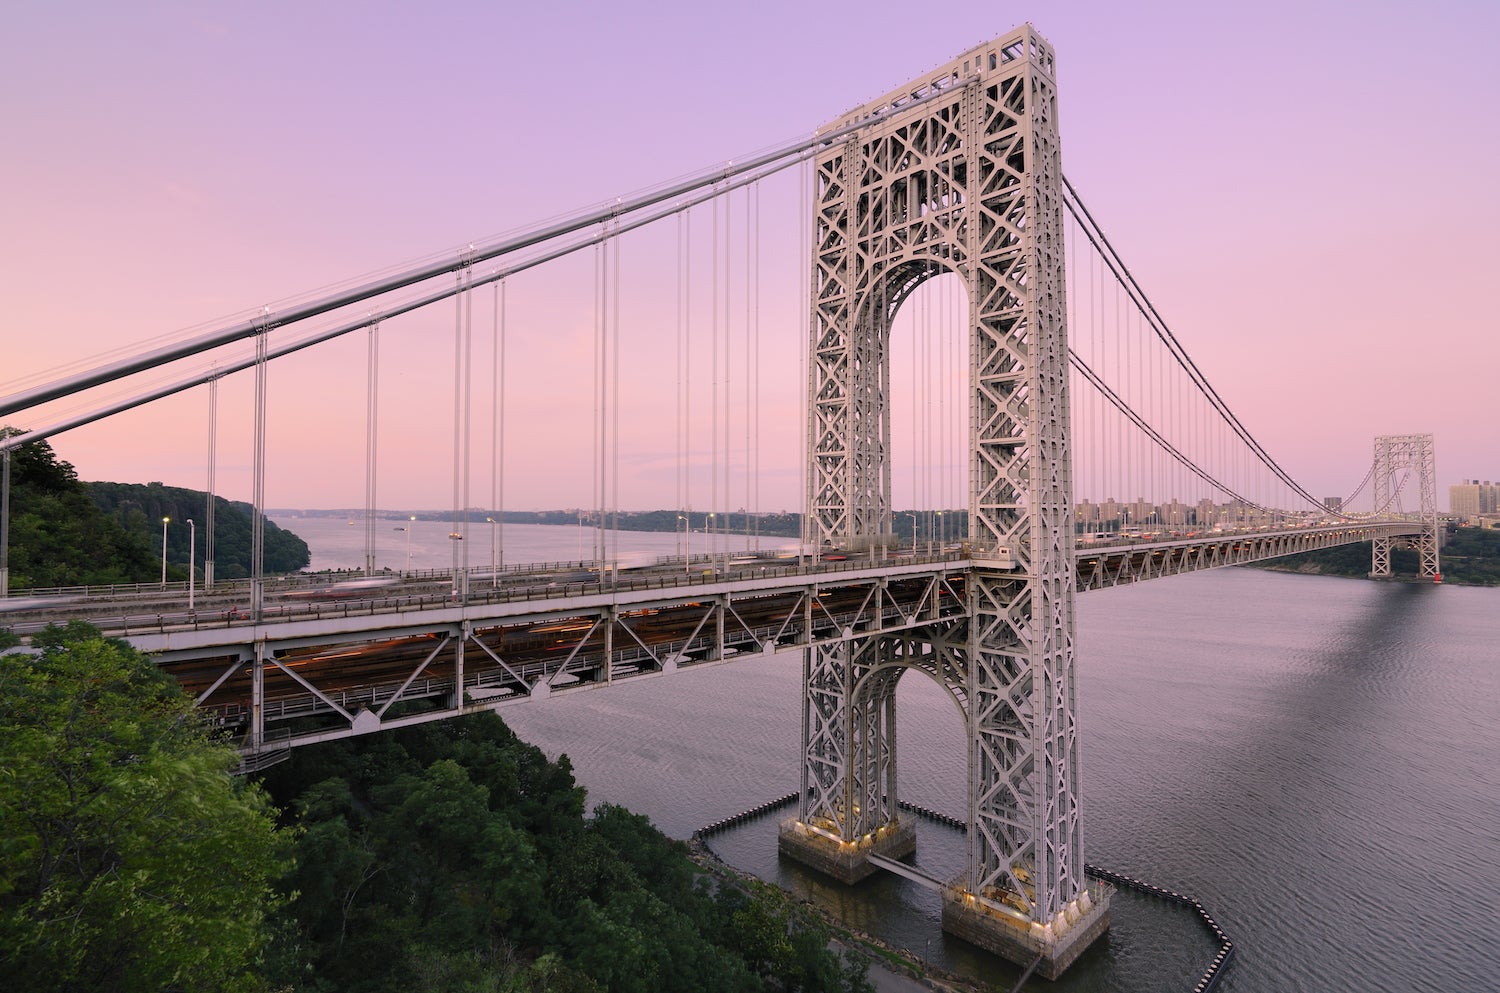 The George Washington Bridge spanning the Hudson River at twilight to connect New Jersey and New York City